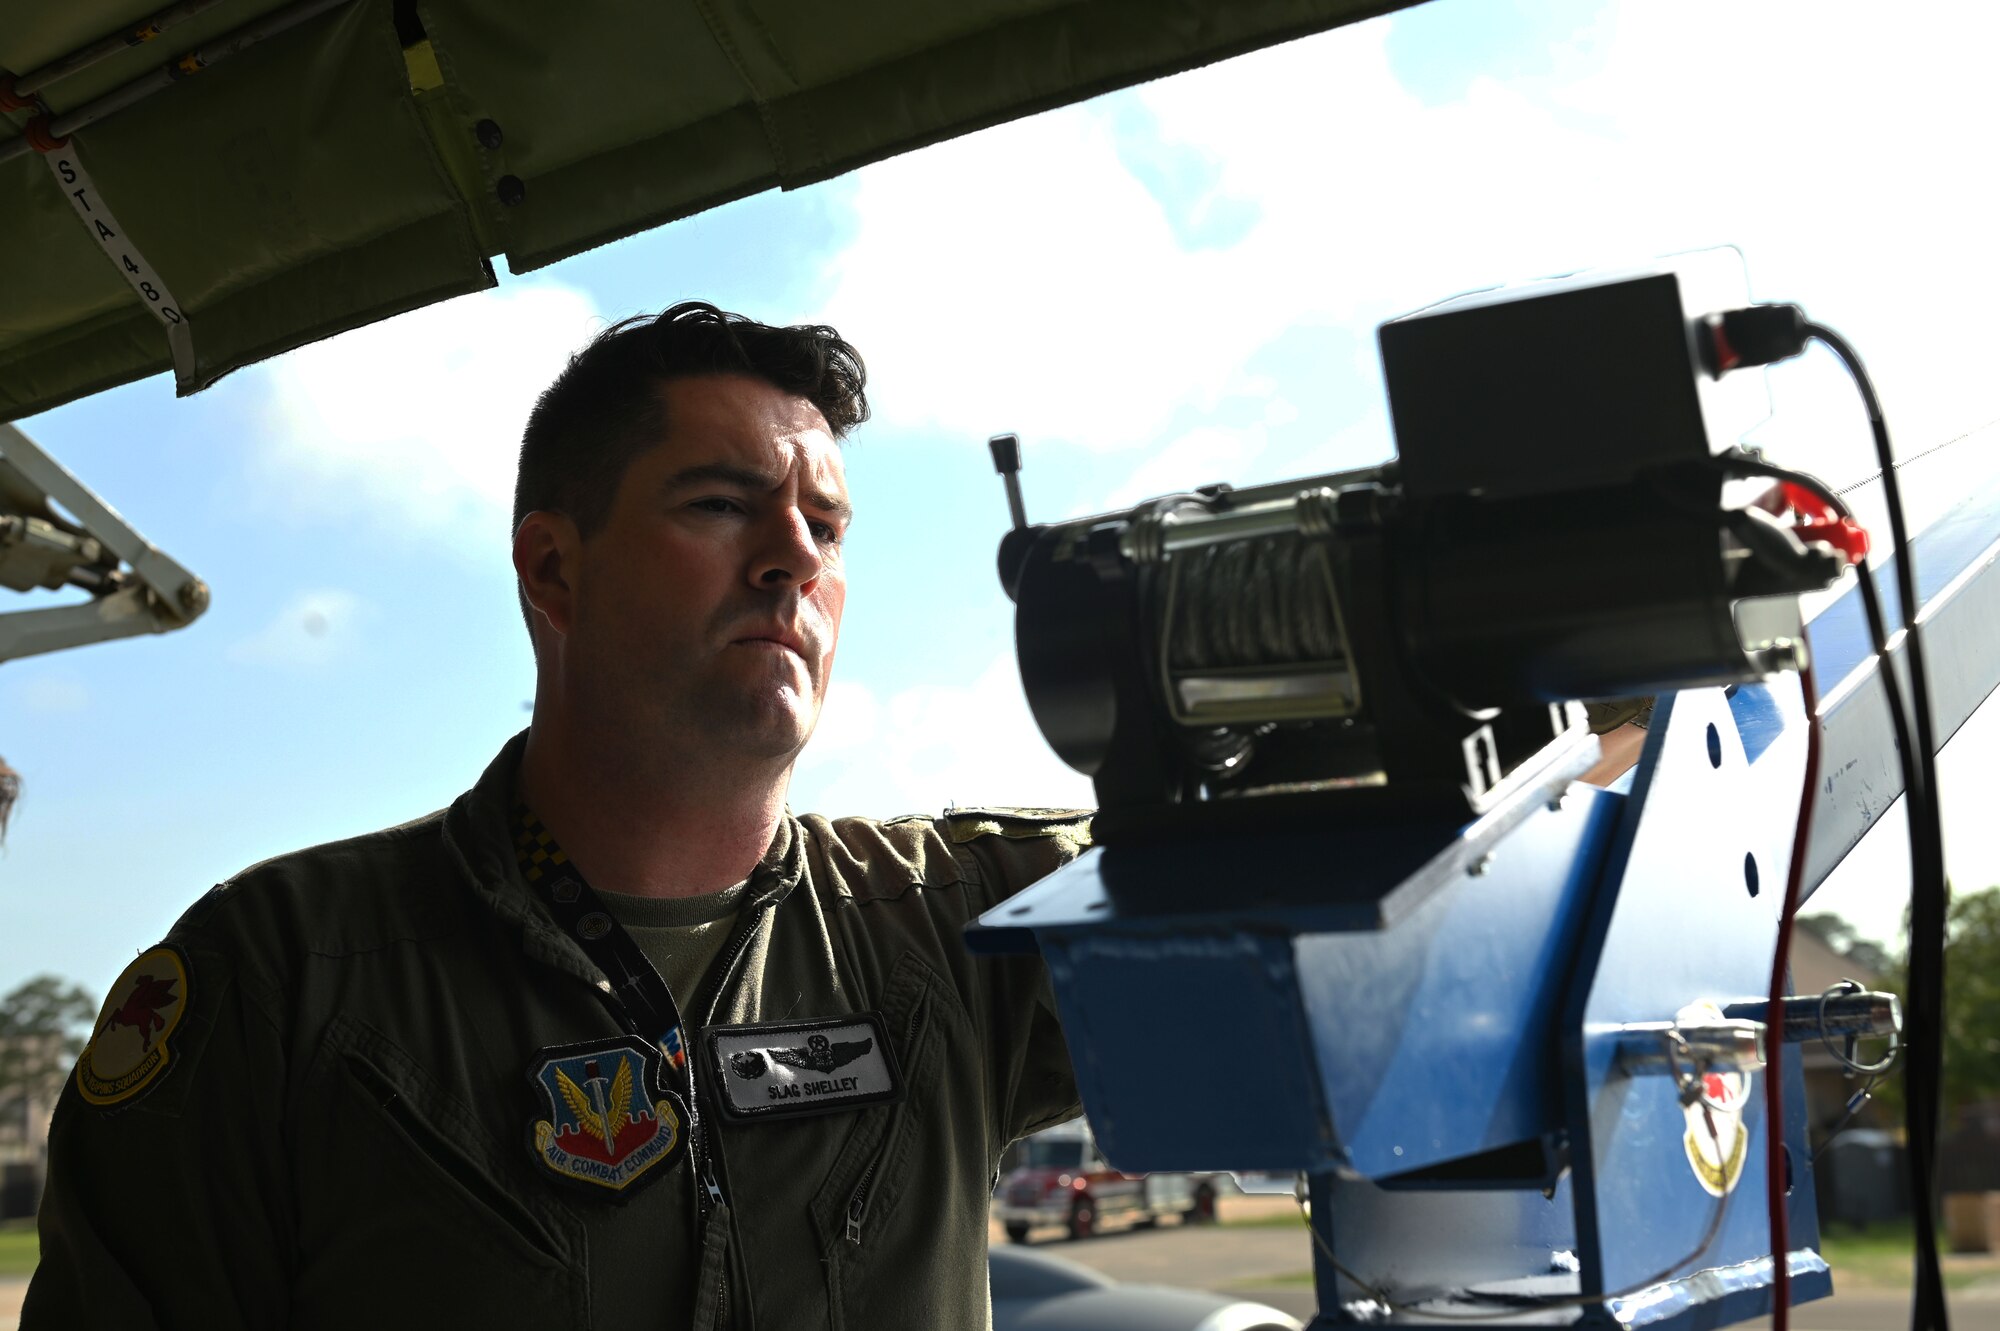 U.S. Air Force Lt. Col. Ian Shelley, 509th Weapons Squadron commander, prepares to operate the Pack and Transport Reloader (PATR) crane prototype at Hurlburt Field, Florida, May 6, 2023. The 509th WPS partnered with Fairchild Air Force Base’s innovation cell to create the crane with a goal of expanding the KC-135 Stratotanker’s ability to load and unload various types of cargo using the PATR crane prototype. (U.S. Air Force photo by Staff Sgt. Lawrence Sena)